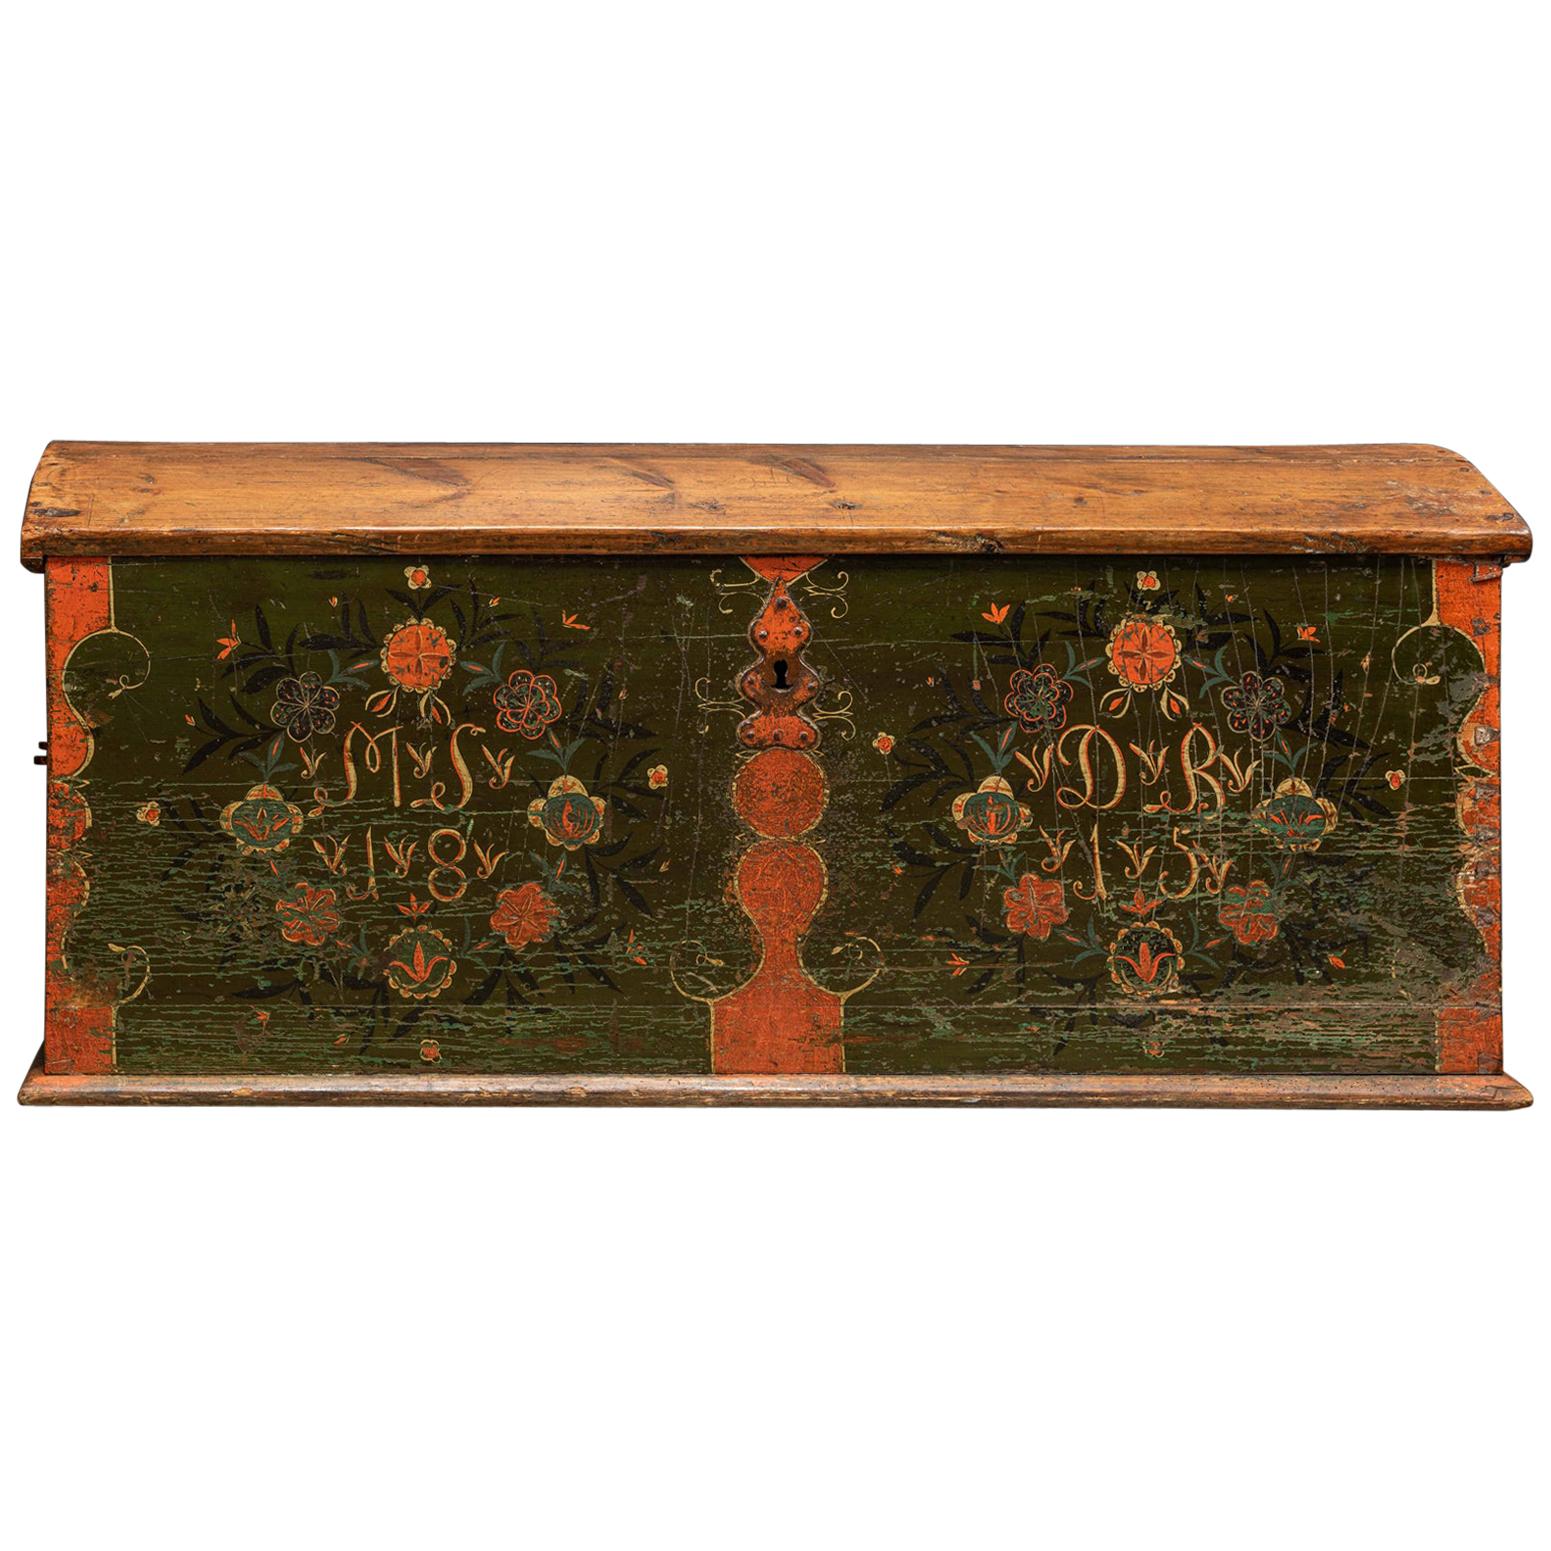 Early 19th Century Swedish Marriage/Dowry Chest